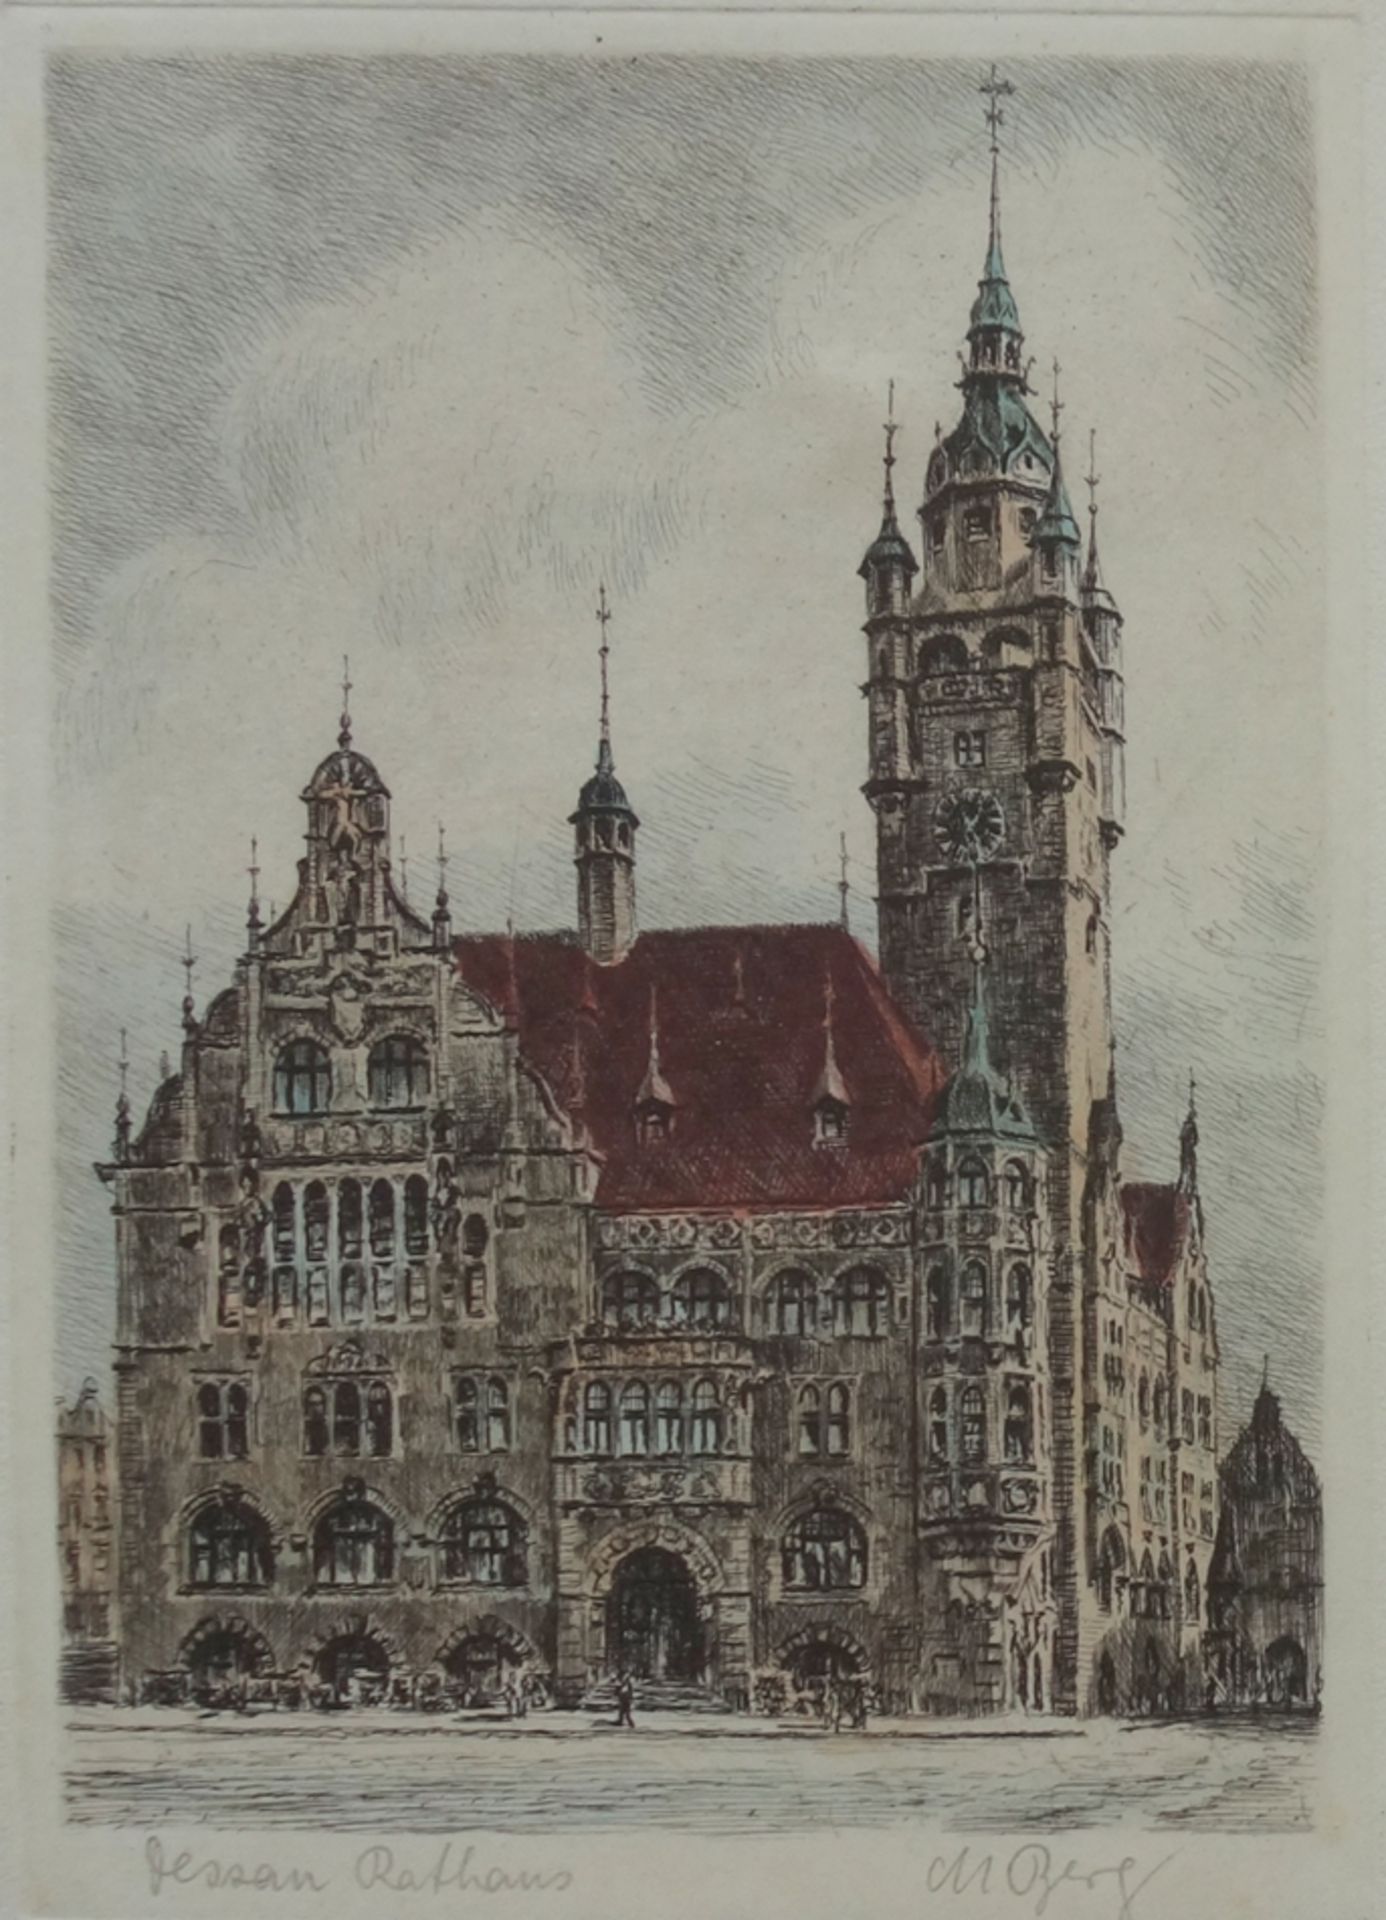 Max Berg (1870 - ?), "Dessau Town Hall", coloured etching